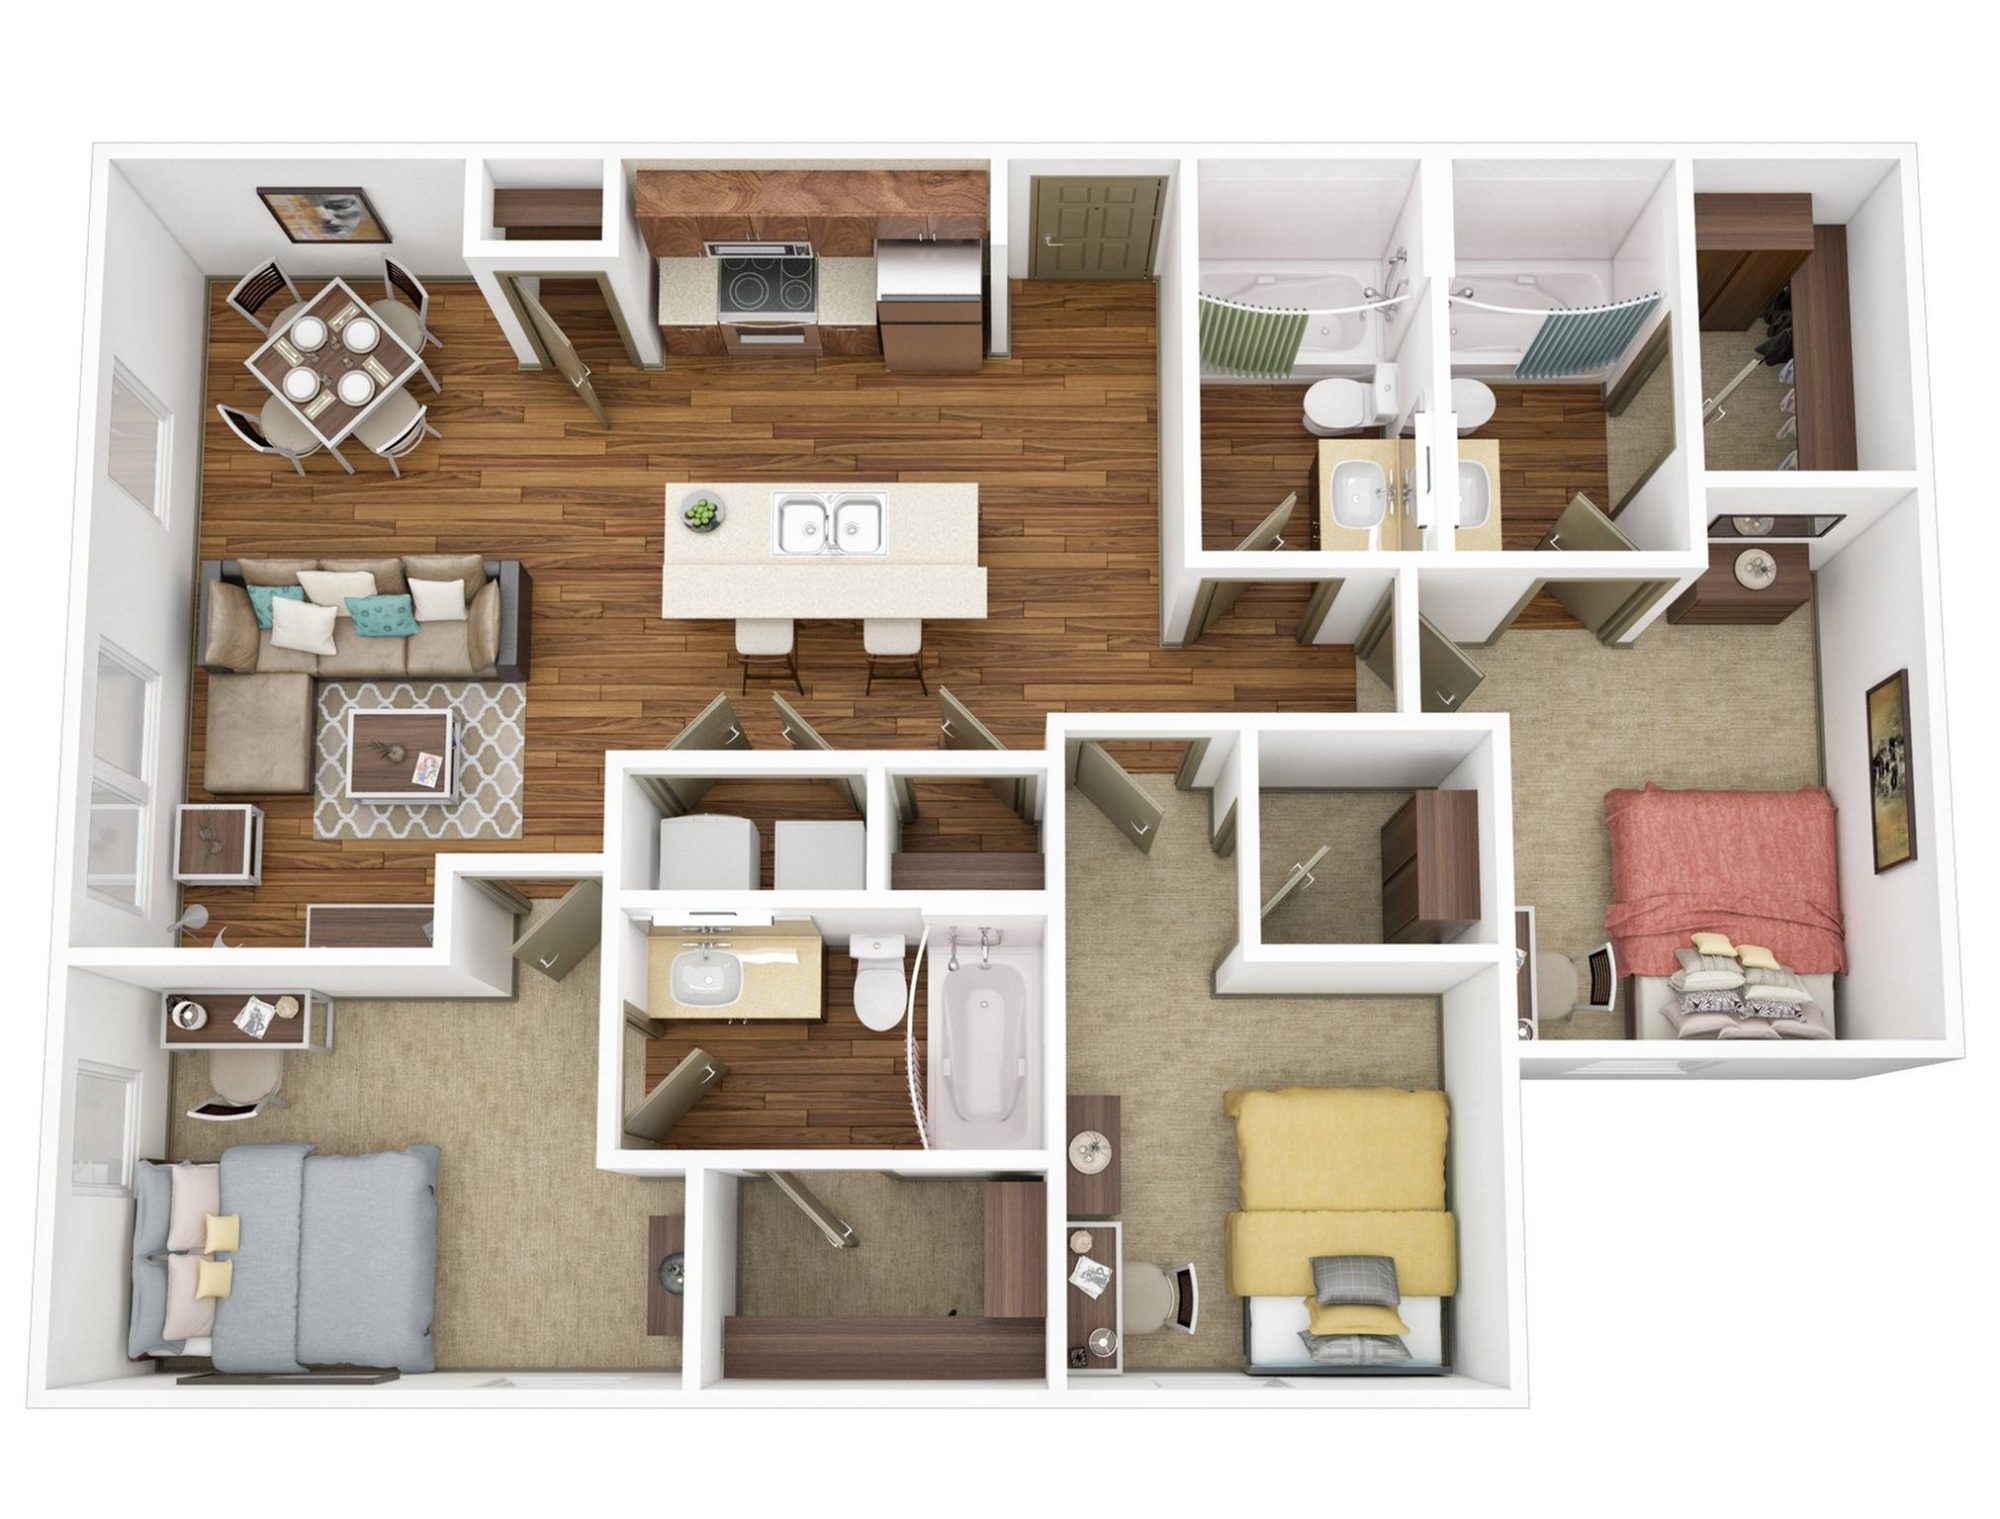 A 3D image of the 3BR/3BA – Platinum Deluxe floorplan, a 1260 squarefoot, 3 bed / 3 bath unit